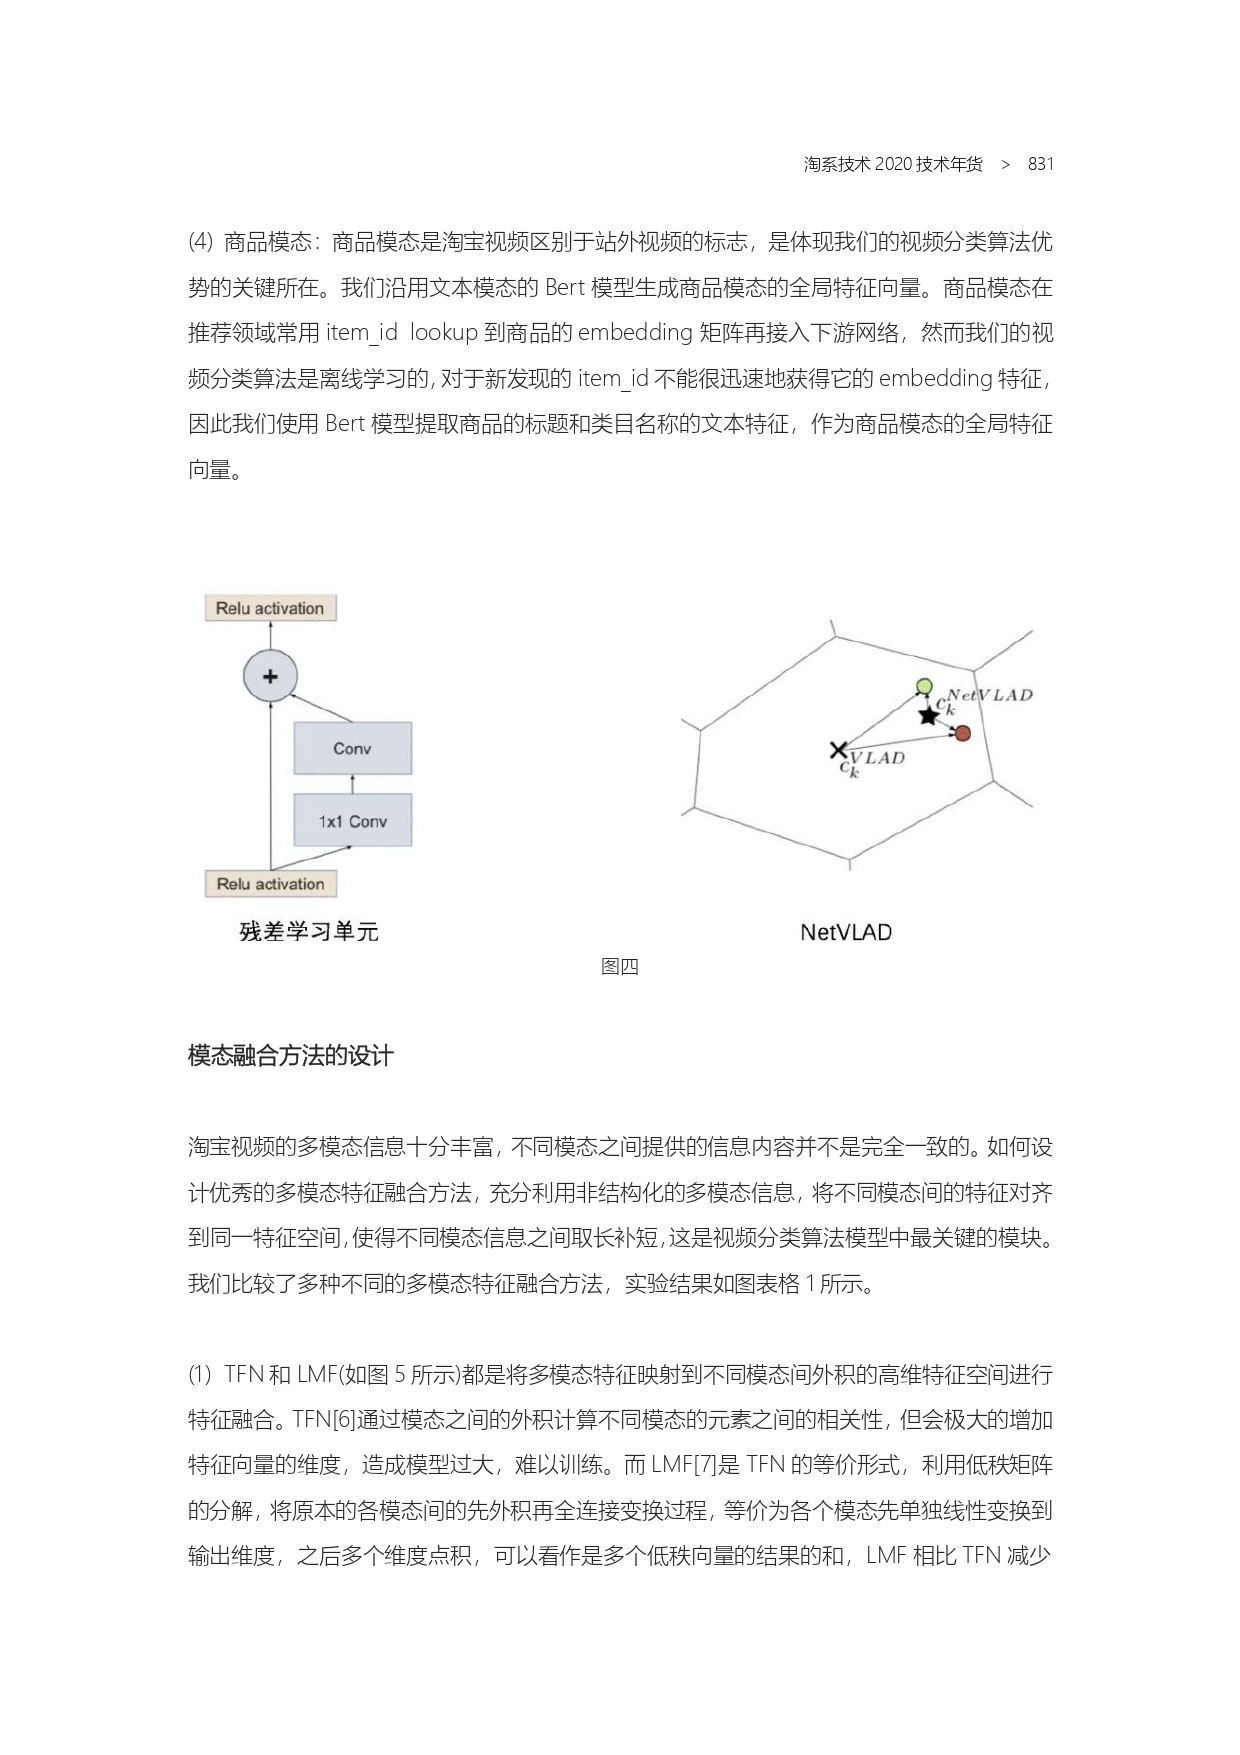 The Complete Works of Tao Technology 2020-571-1189-1-300_page-0261.jpg